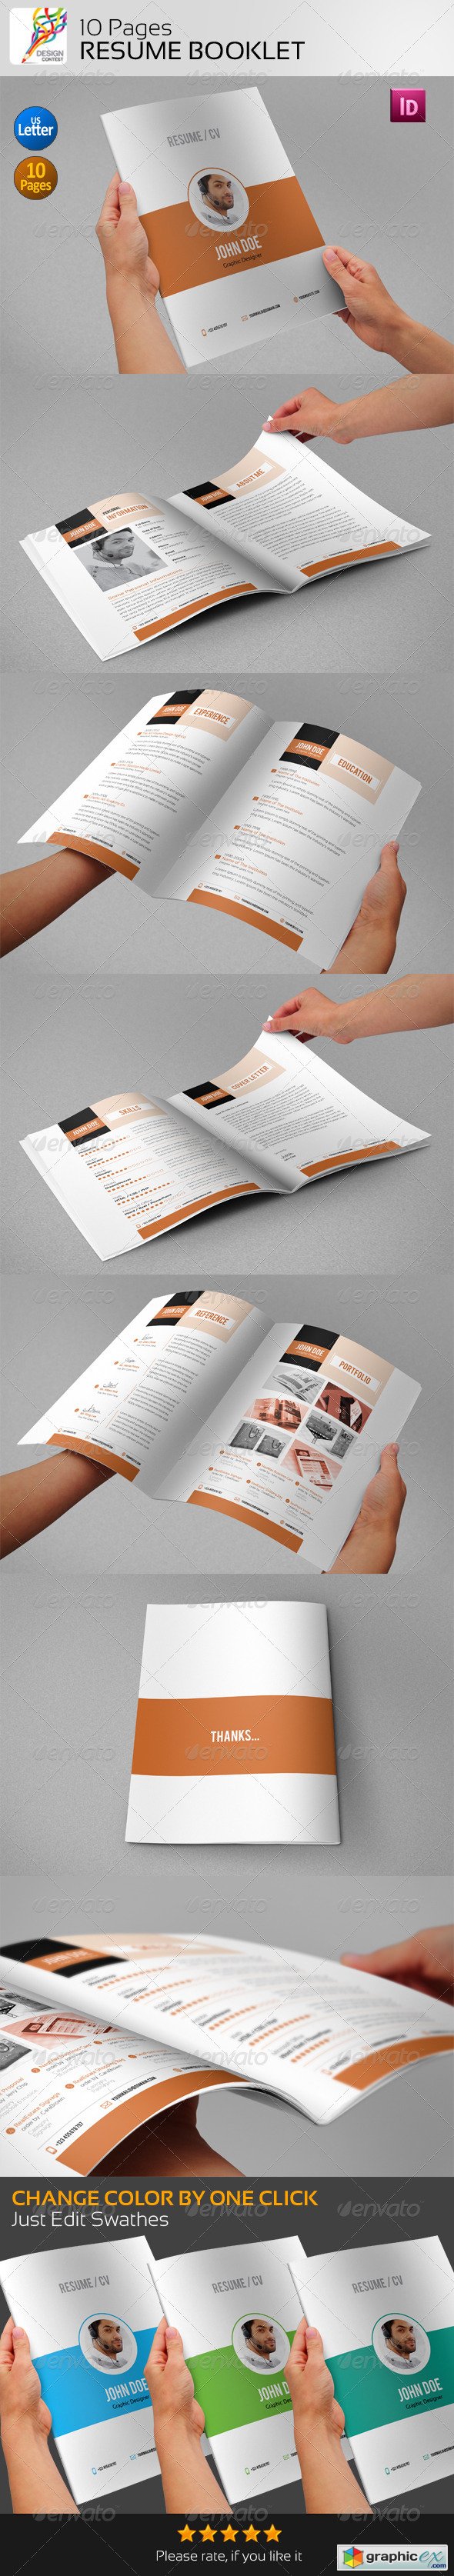 Resume Booklet (10 Pages)